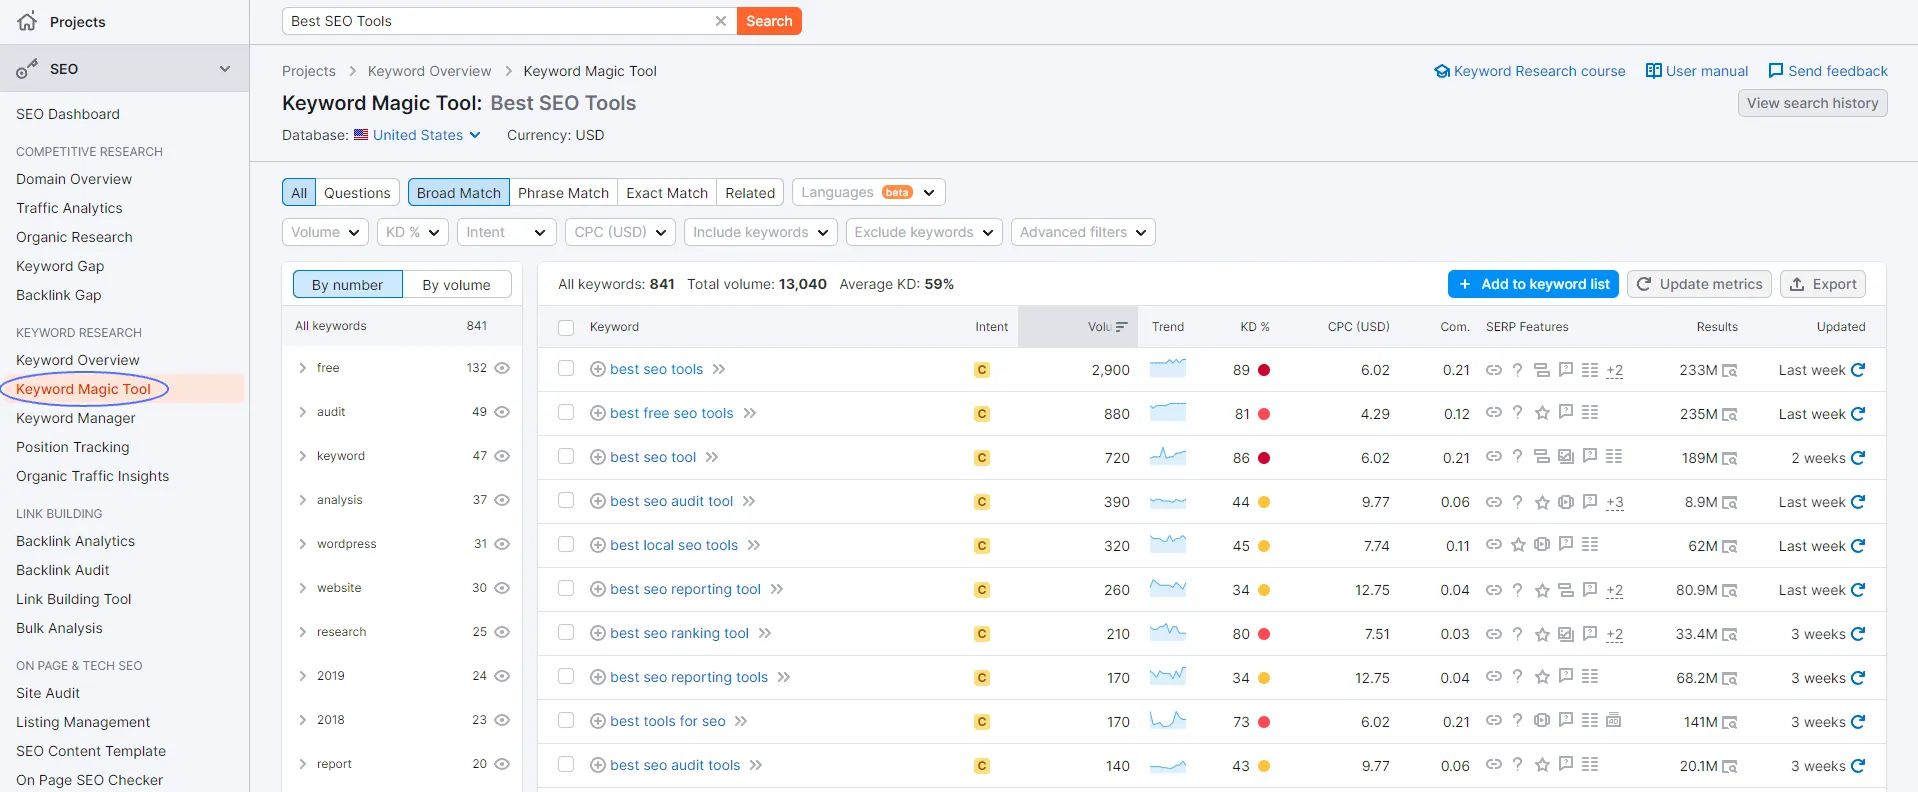 SEMRush's keyword magic tool using the keyword 'best SEO tools' to show the results and the data.